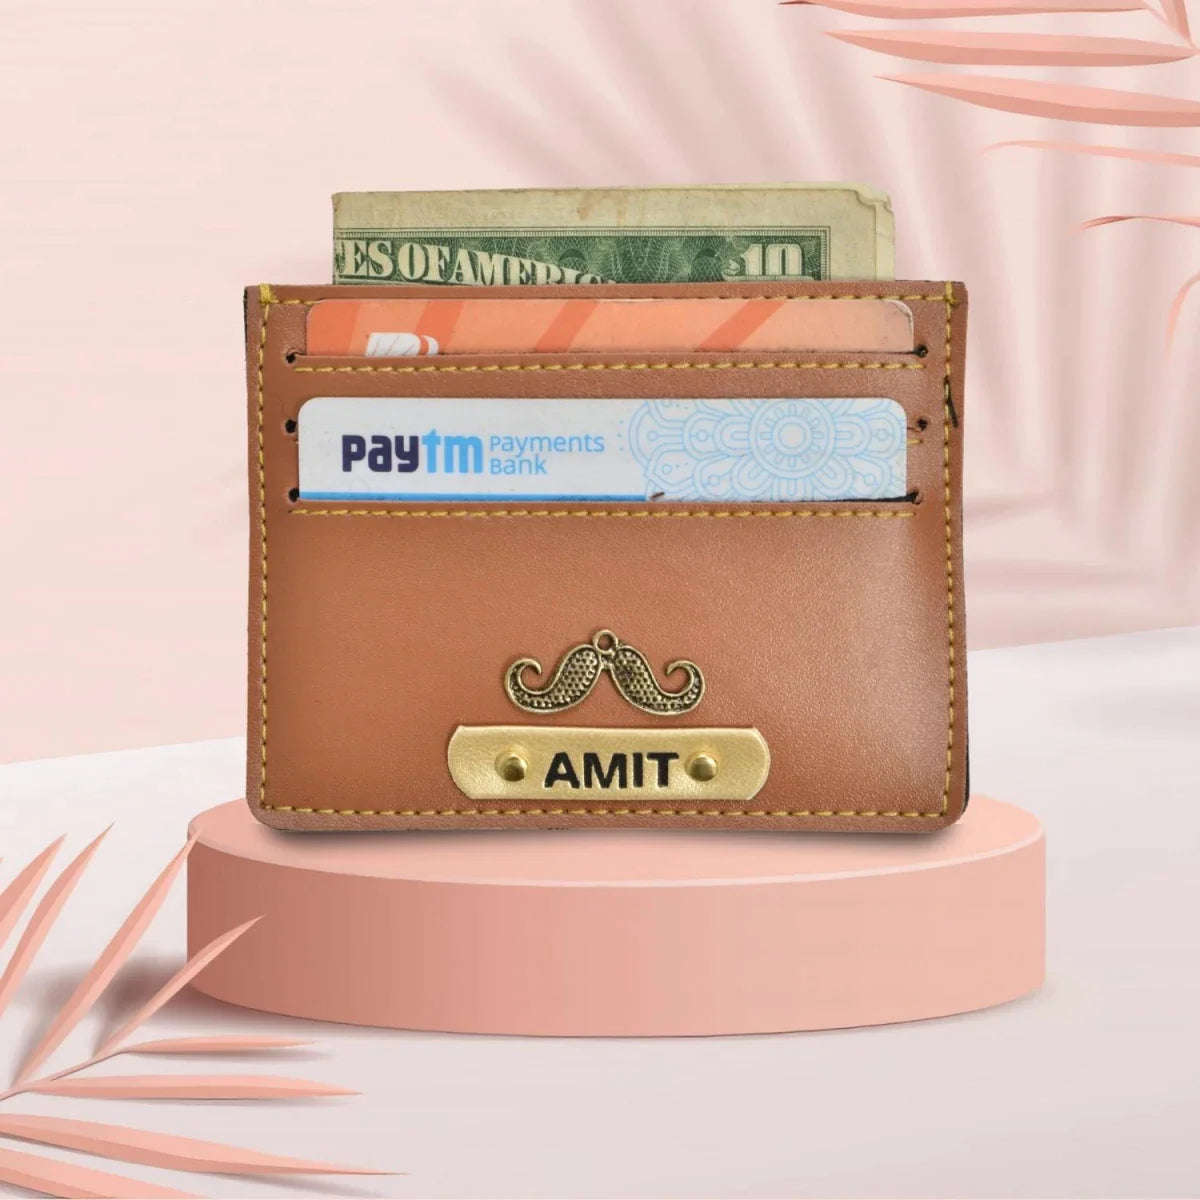 Keep your cards organized and stylish with our personalized vegan leather unisex card wallet.